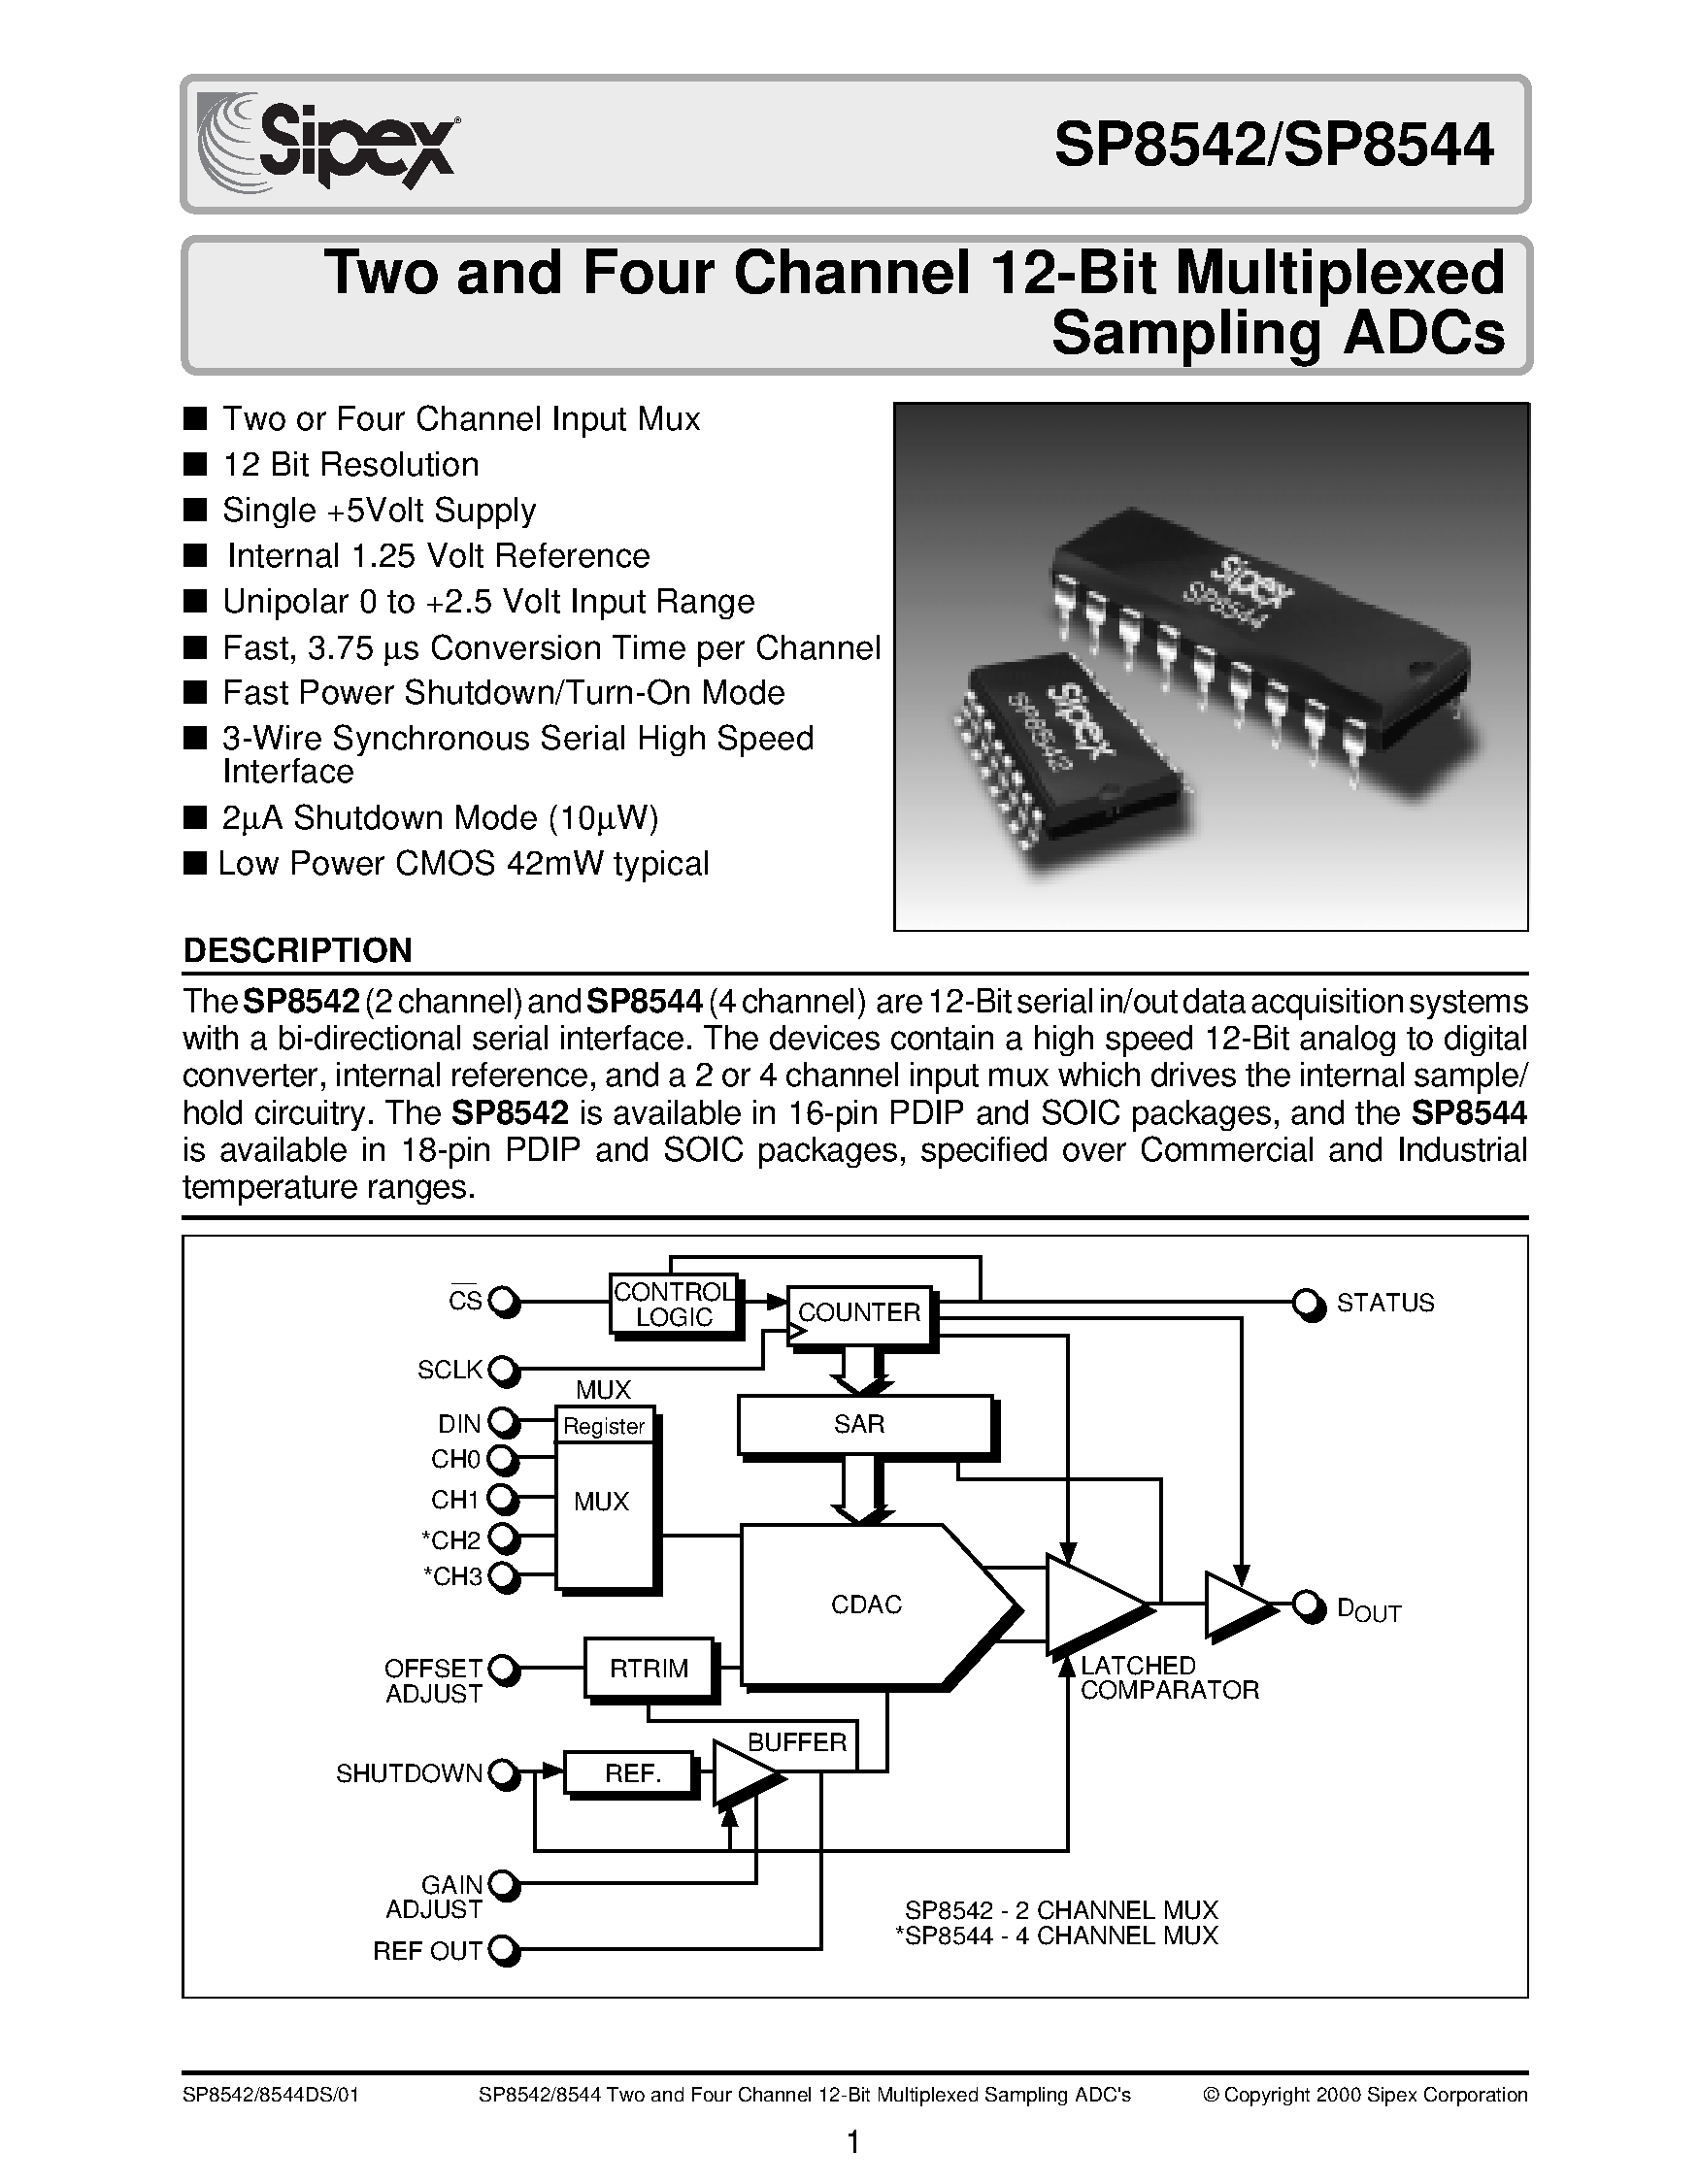 Datasheet SP8544KN - Two and Four Channel 12-Bit Multiplexed Sampling ADCs page 1